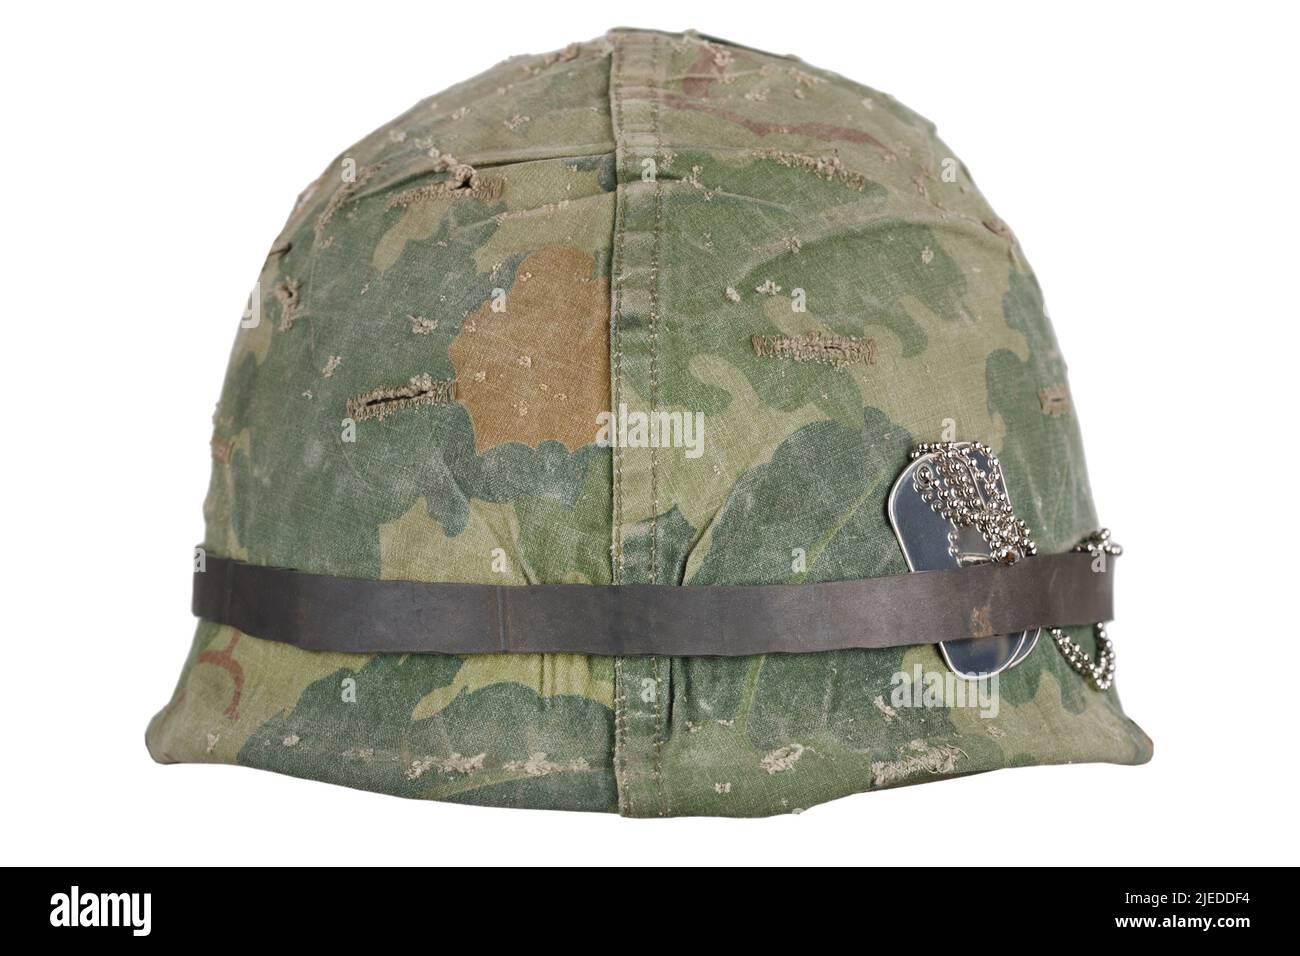 US Army helmet Vietnam war period with camouflage cover and dog tags isolated on white Stock Photo